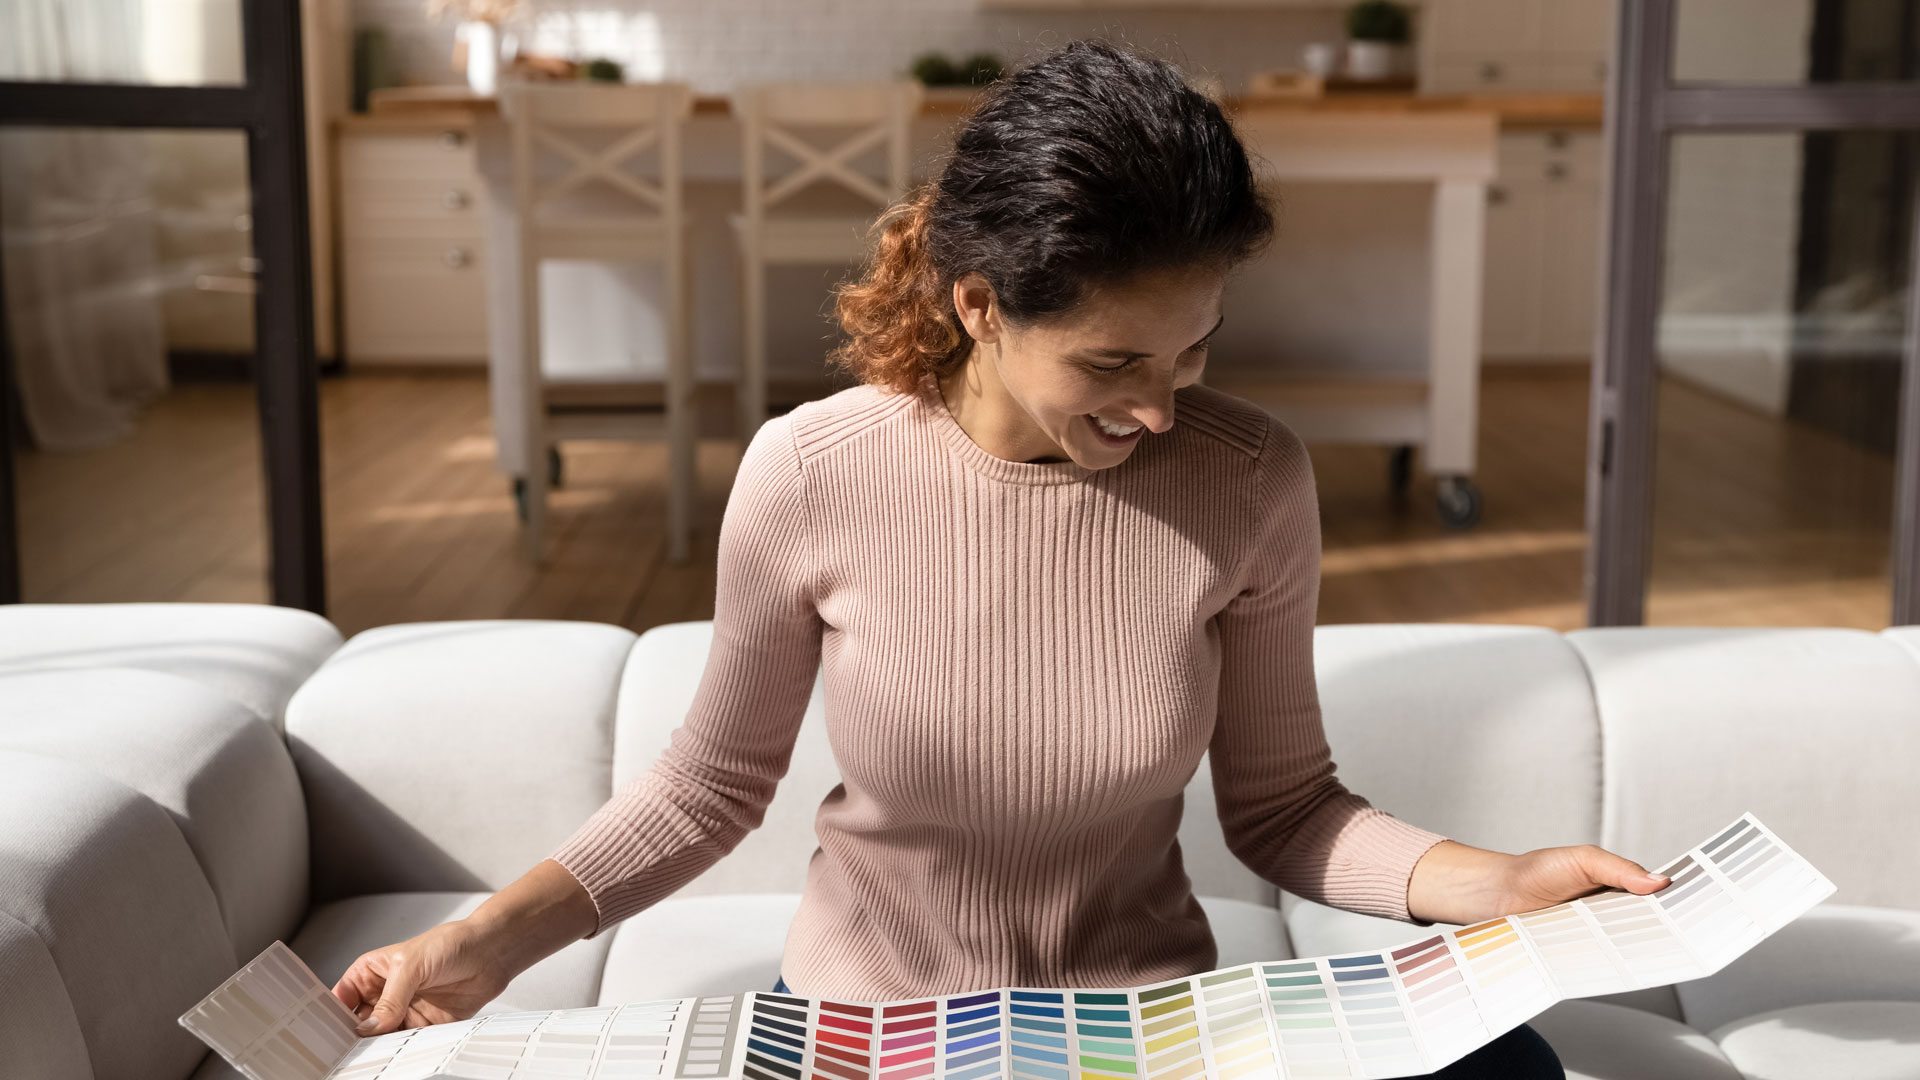 Woman excitedly looking at a book of paint swatches